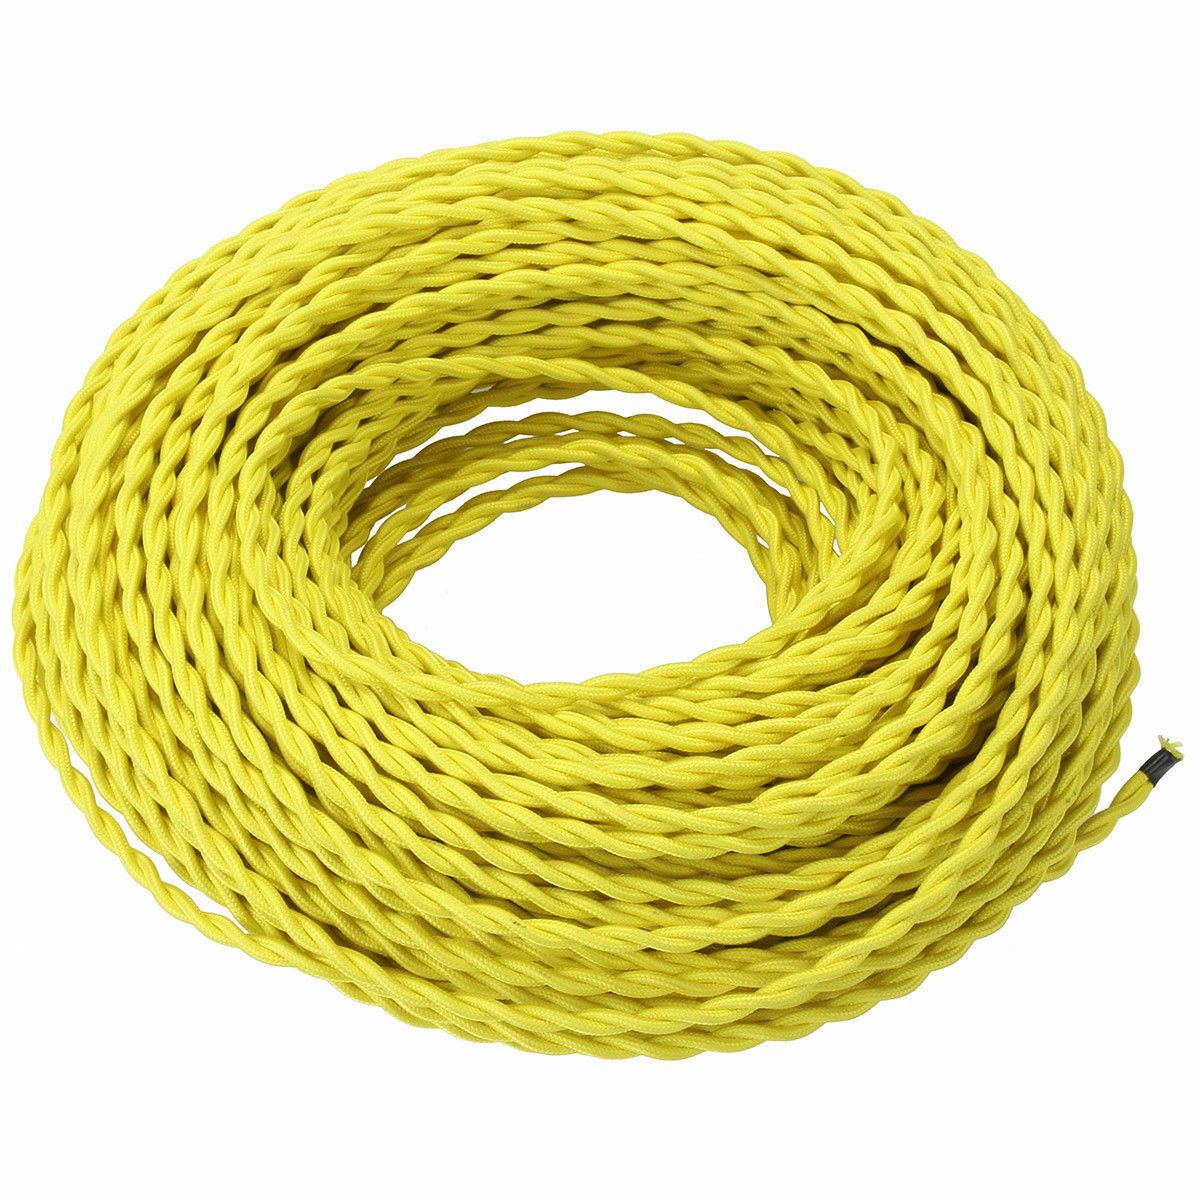 A 5-Meter Braided Twisted Fabric Cord Will Improve Your Lighting Experience~1716